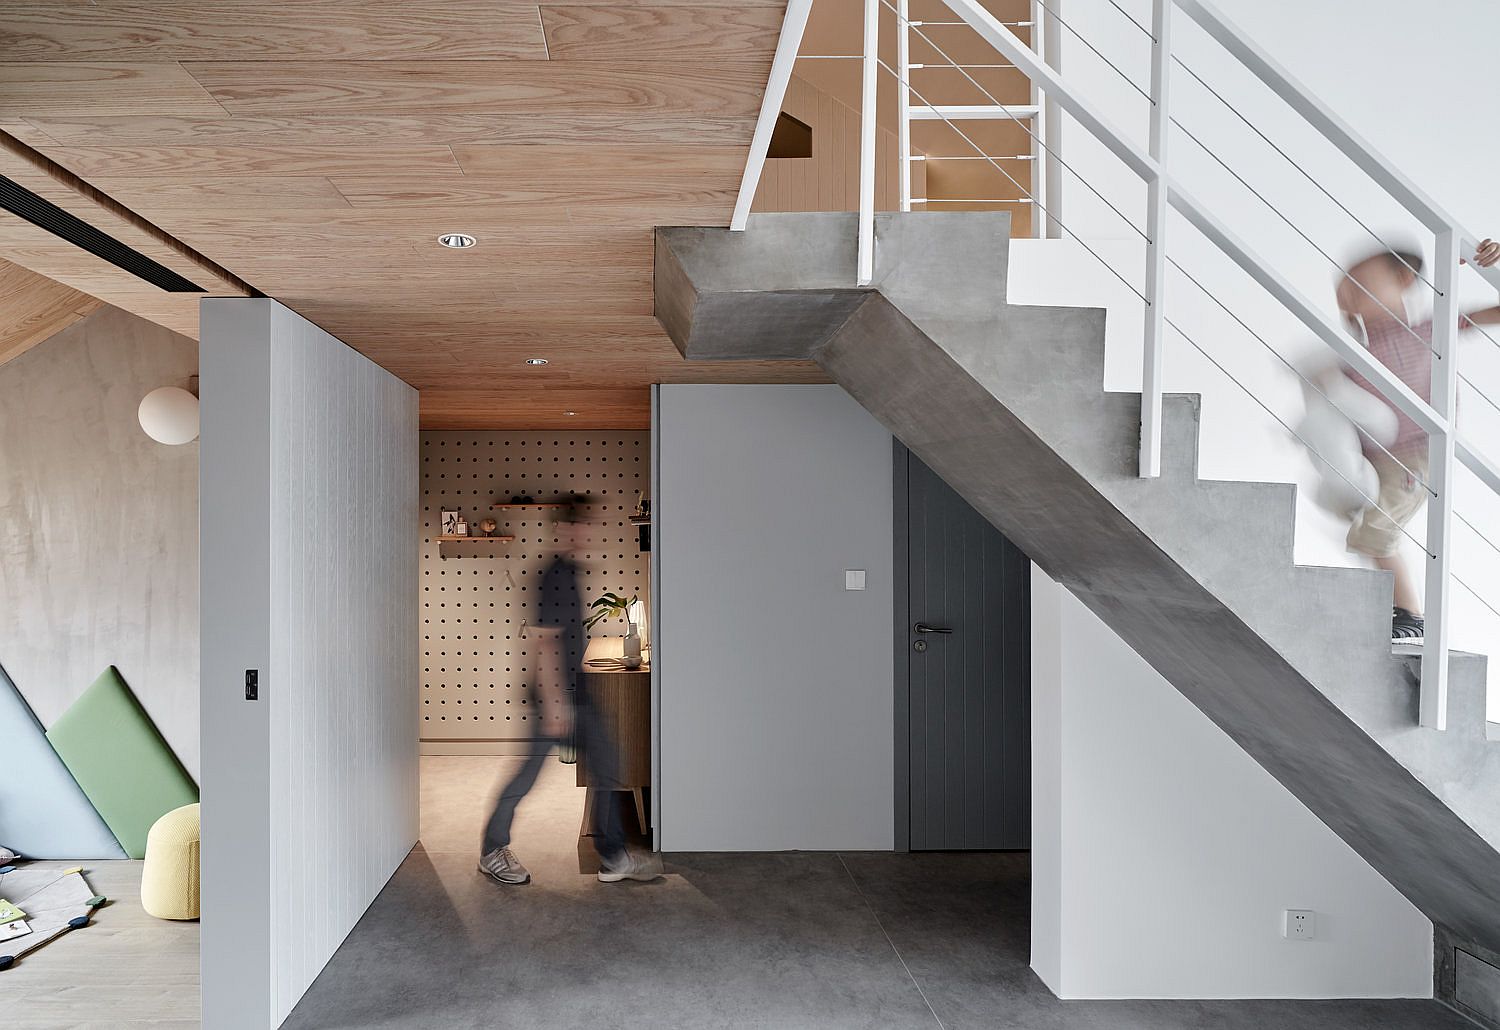 Staircase and floor brings concrete charm to the interior